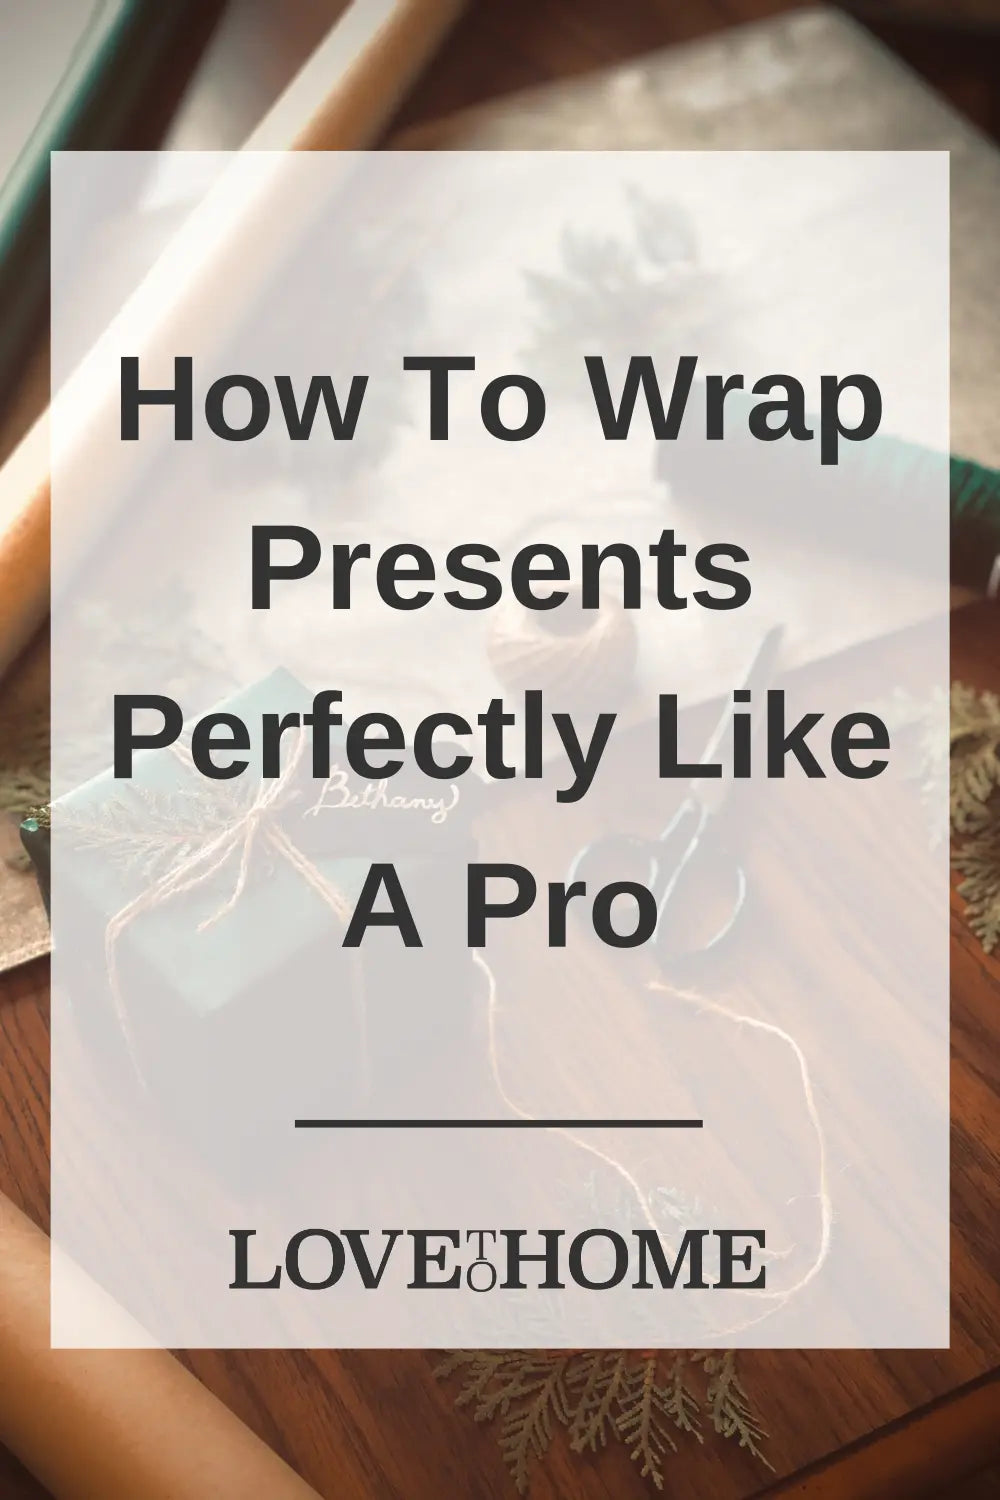 How To Wrap Presents Perfectly Like A Pro